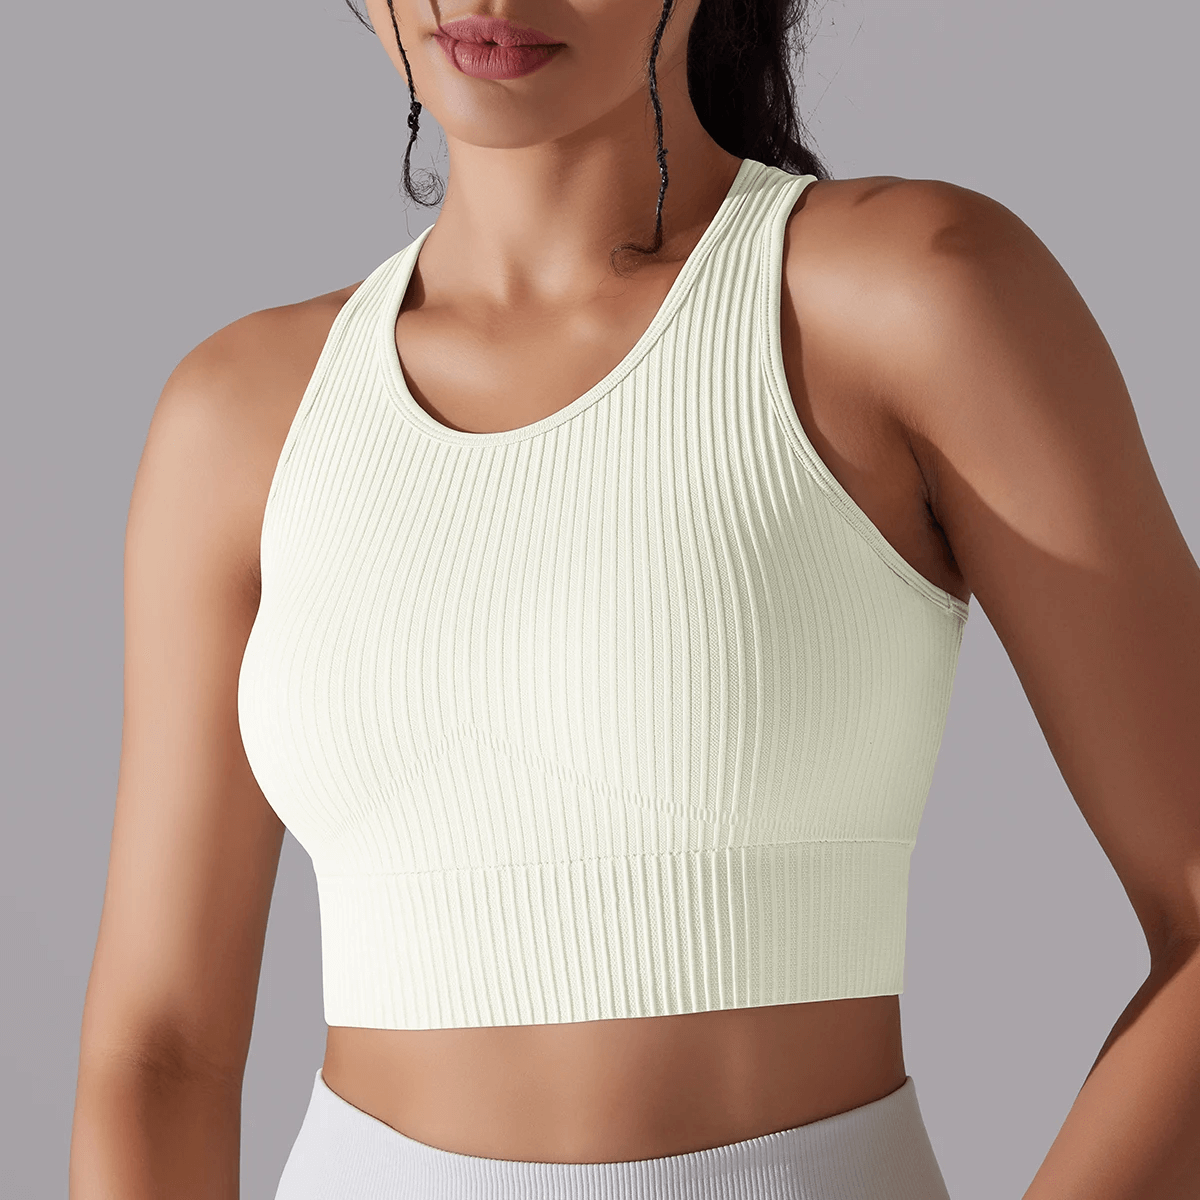 Perfect Ribbed Yoga Short Tank Top for Women - SF2246